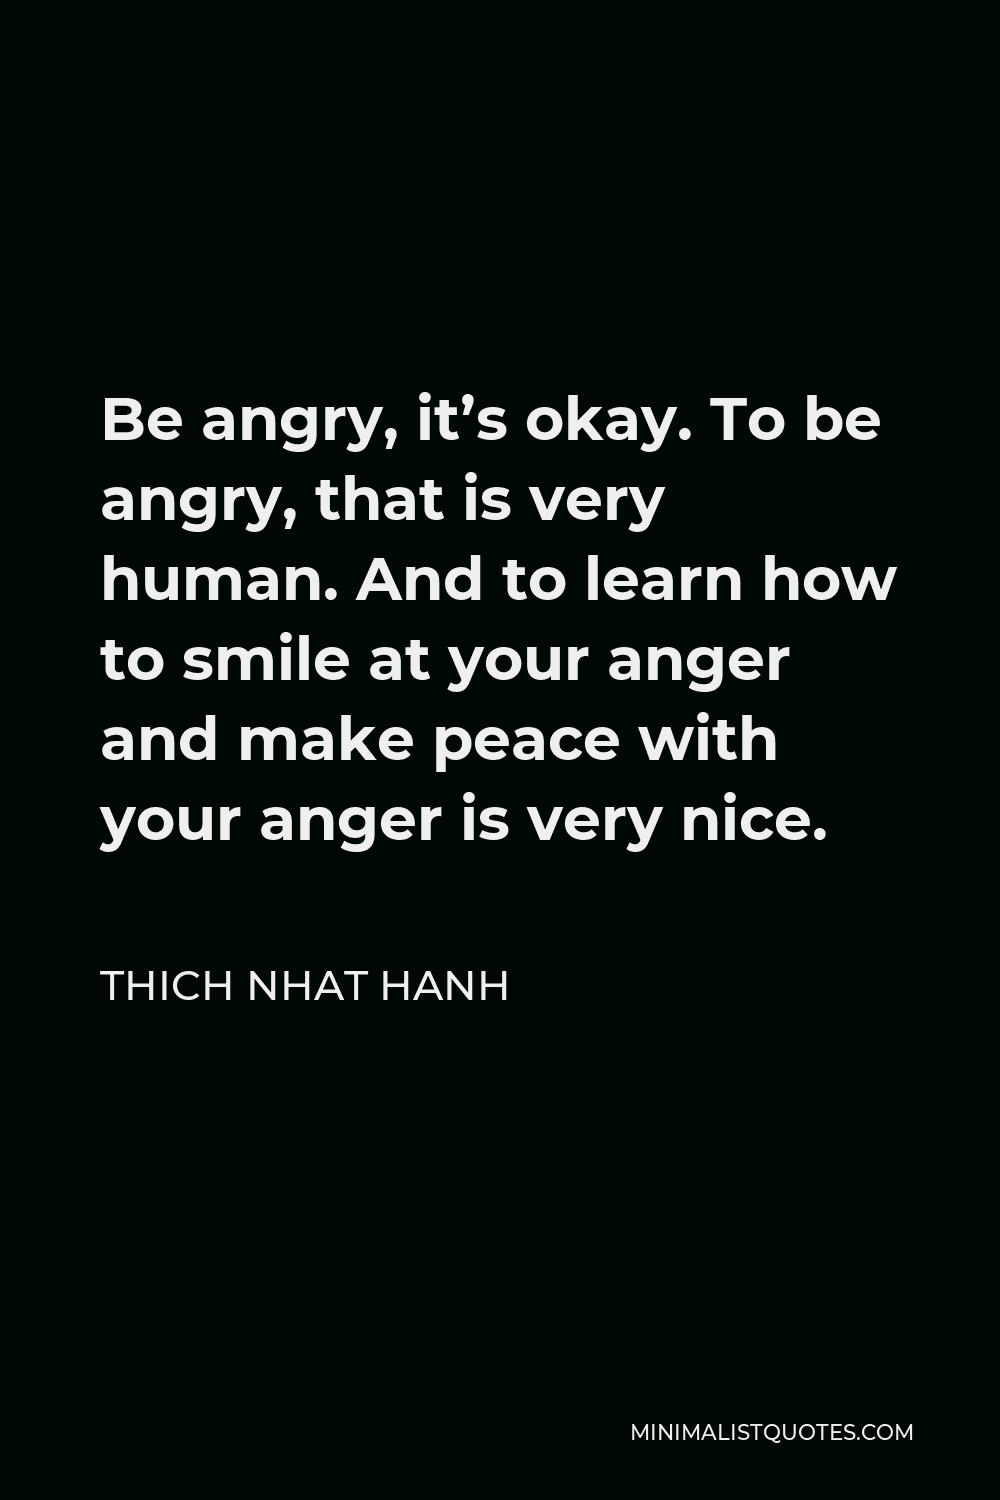 Thich Nhat Hanh Quote - Be angry, it’s okay. To be angry, that is very human. And to learn how to smile at your anger and make peace with your anger is very nice.